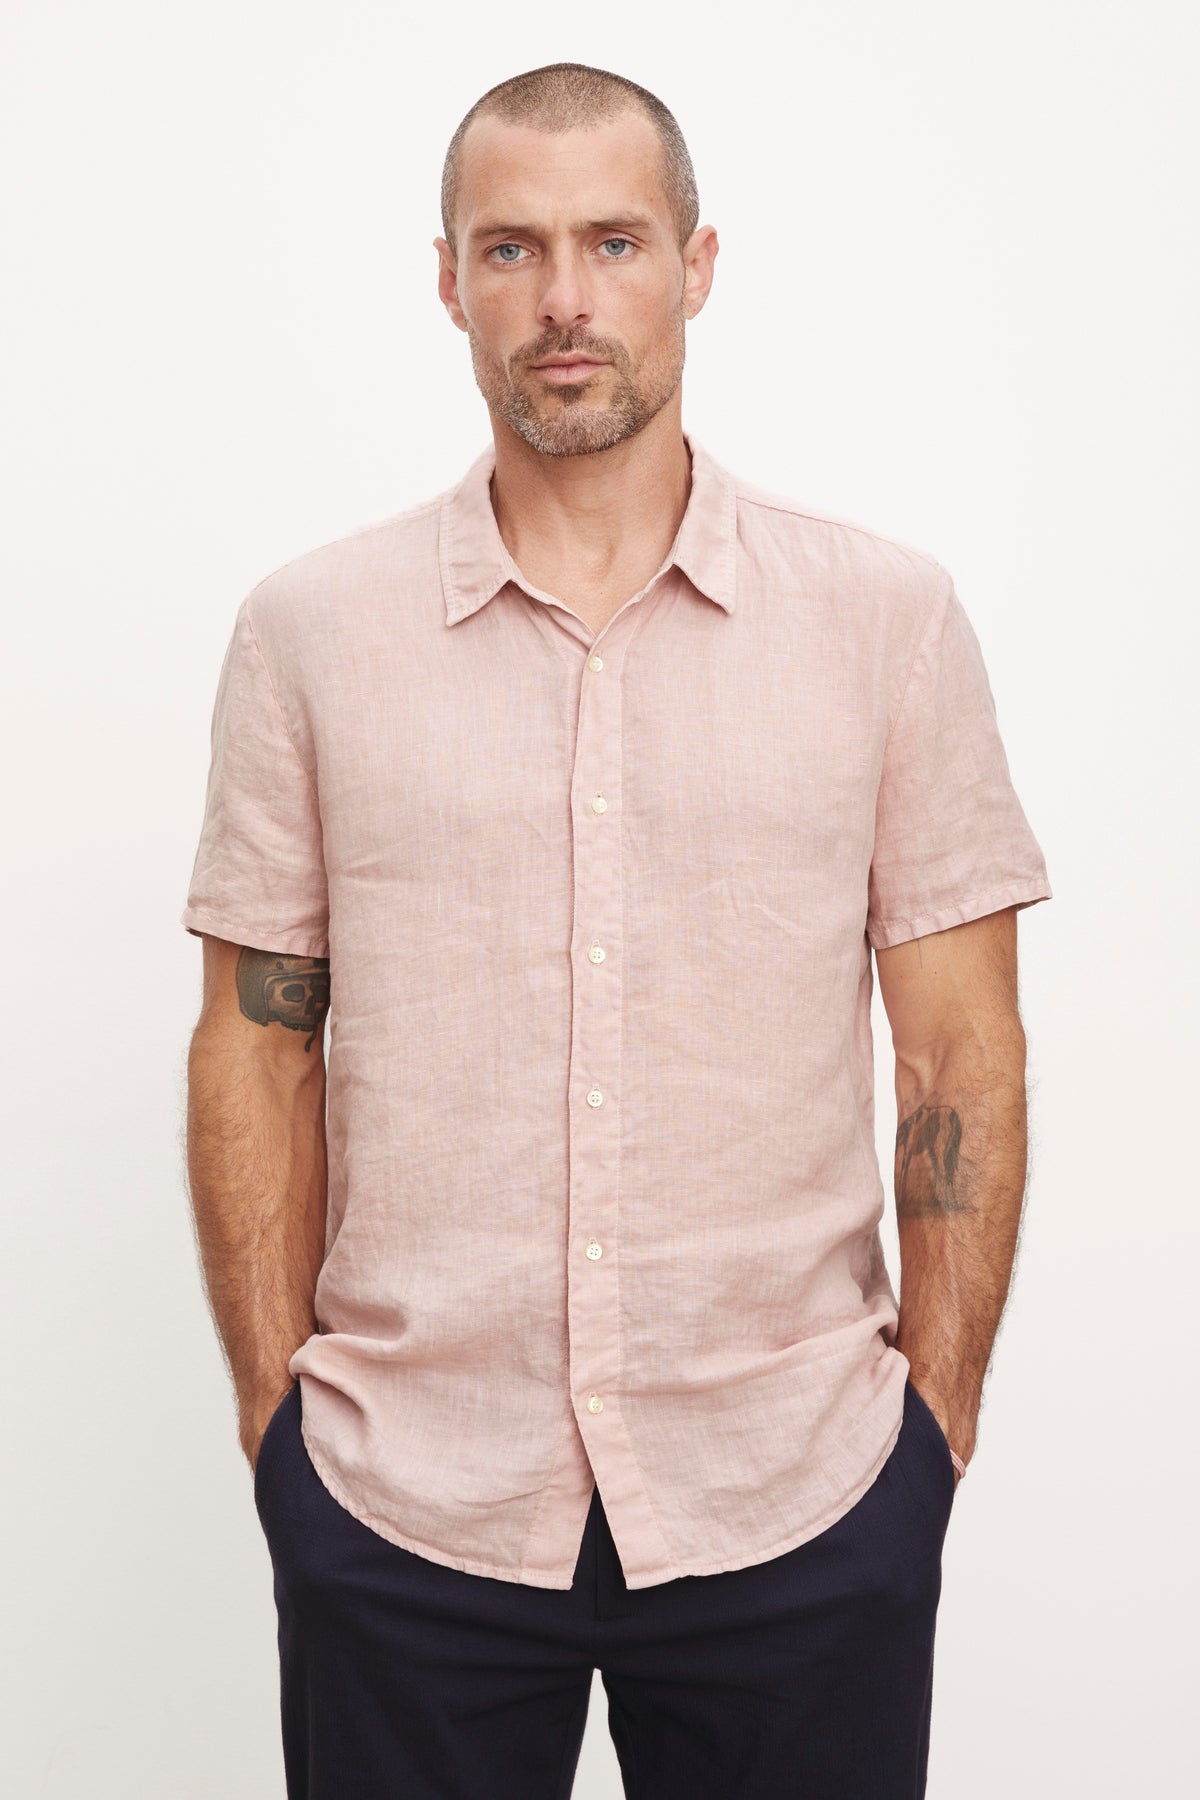   A man with a beard stands wearing a Velvet by Graham & Spencer MACKIE LINEN BUTTON-UP SHIRT in pink and navy pants, looking directly at the camera. He has tattoos visible on his arms. 